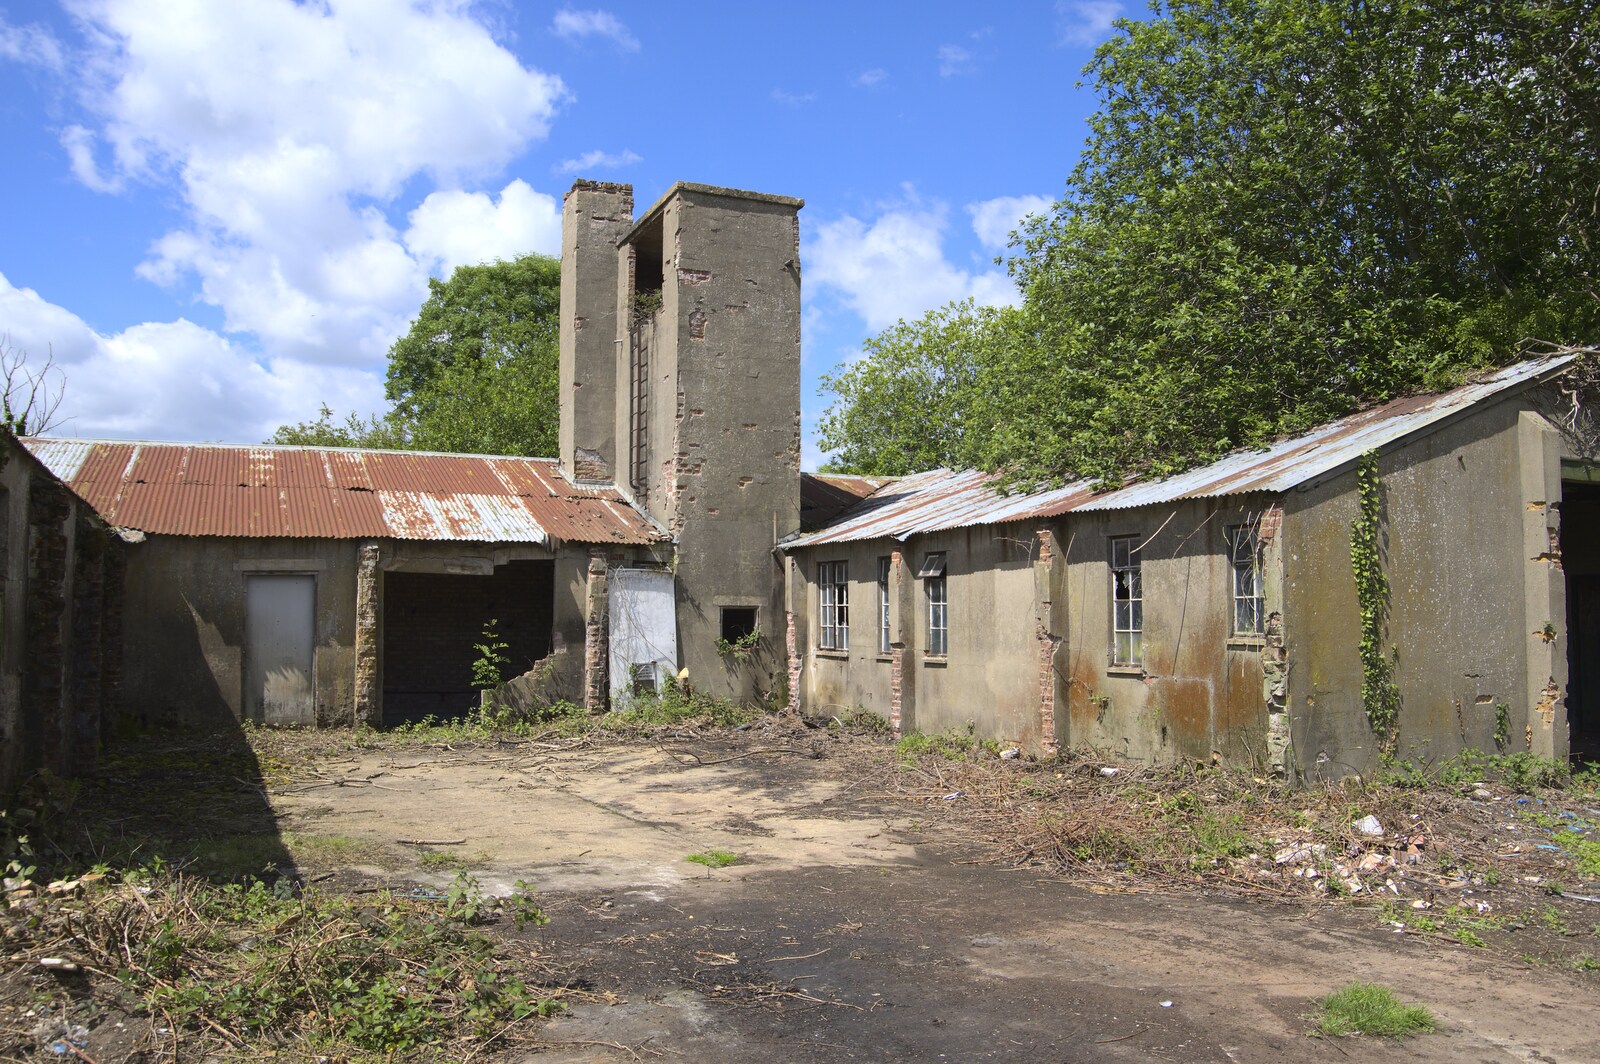 There are three or four complete sets of buildings from A 1940s Timewarp, Site 4, Bungay Airfield, Flixton, Suffolk - 9th June 2022